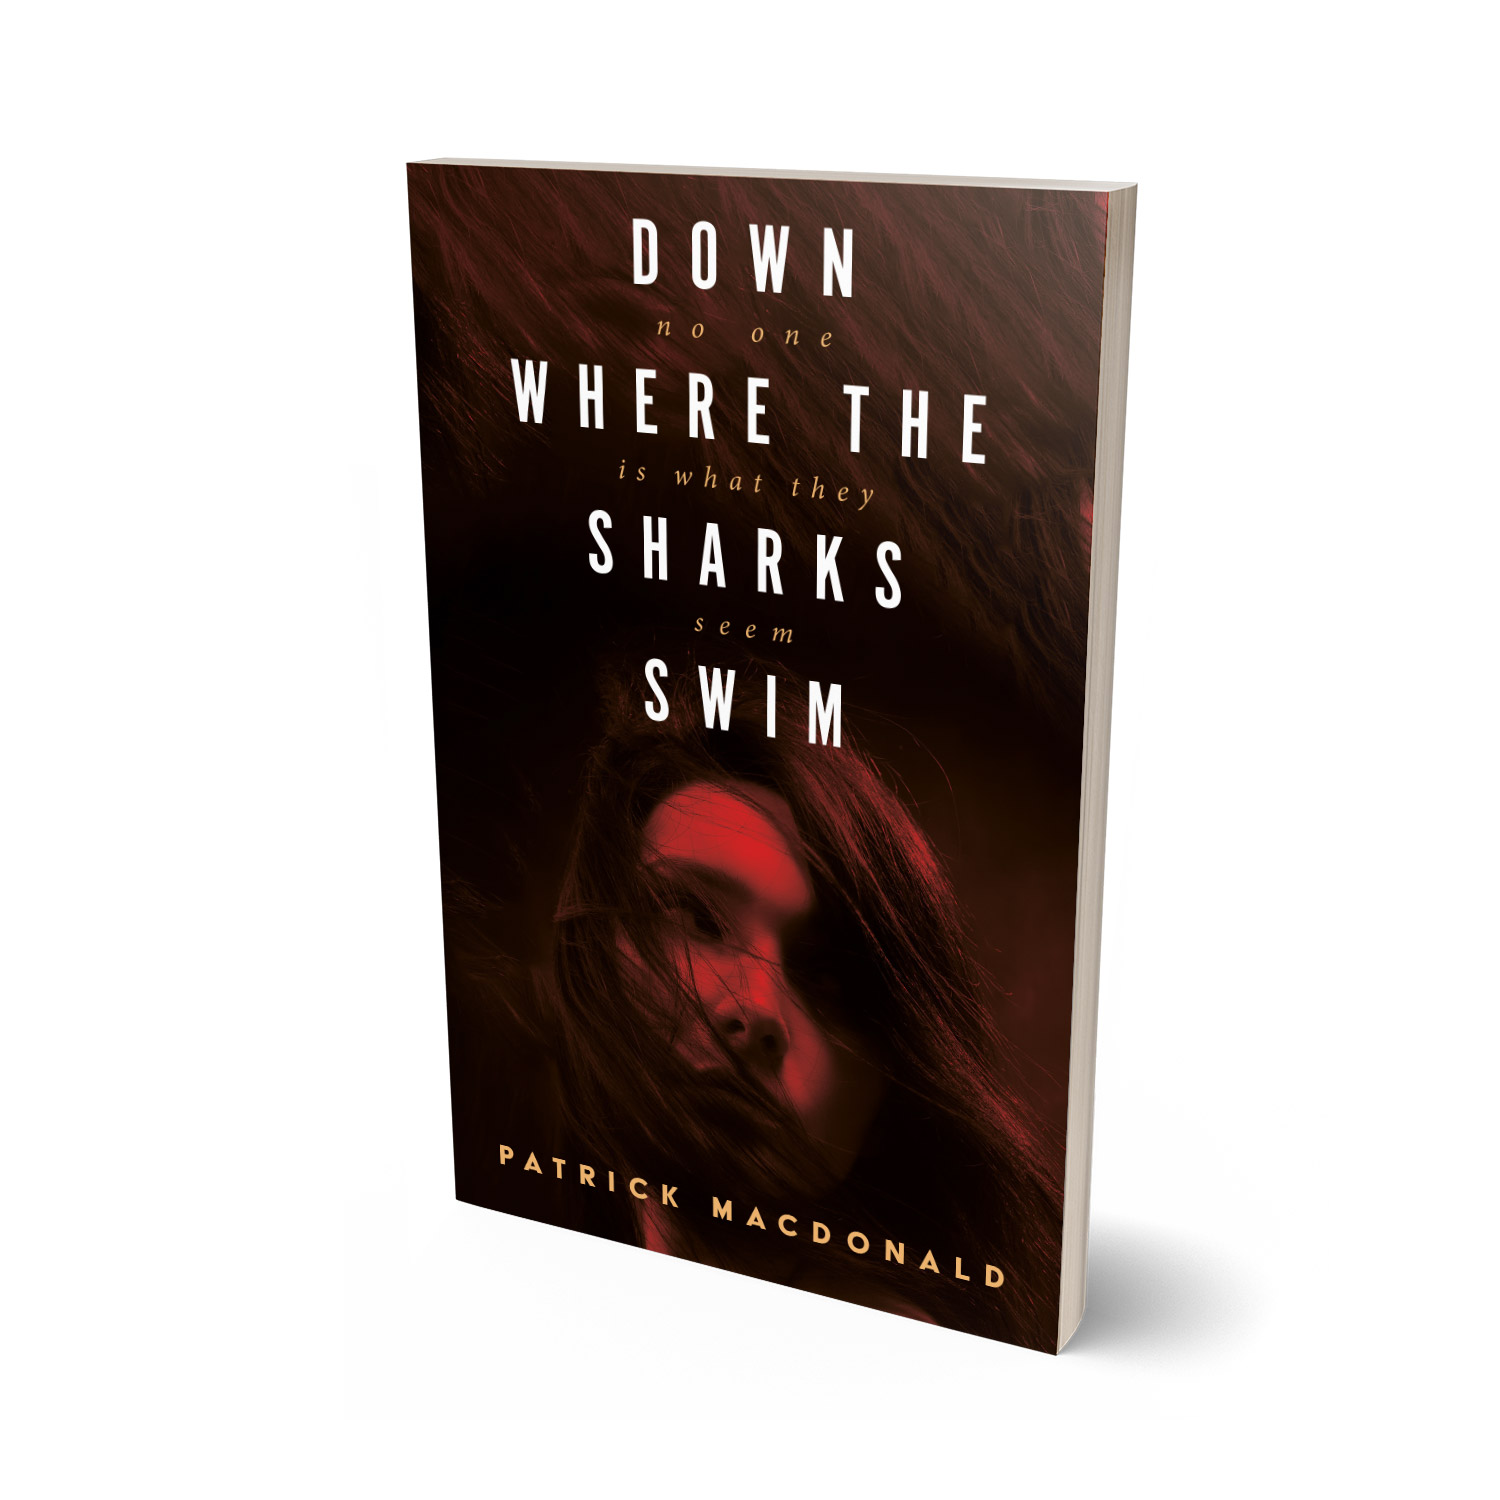 'Down Where The Sharks Swim' is a London set, female-focussed novel. The author is Patrick MacDonald. The book cover design and interior formatting are by Mark Thomas. To learn more about what Mark could do for your book, please visit coverness.com.